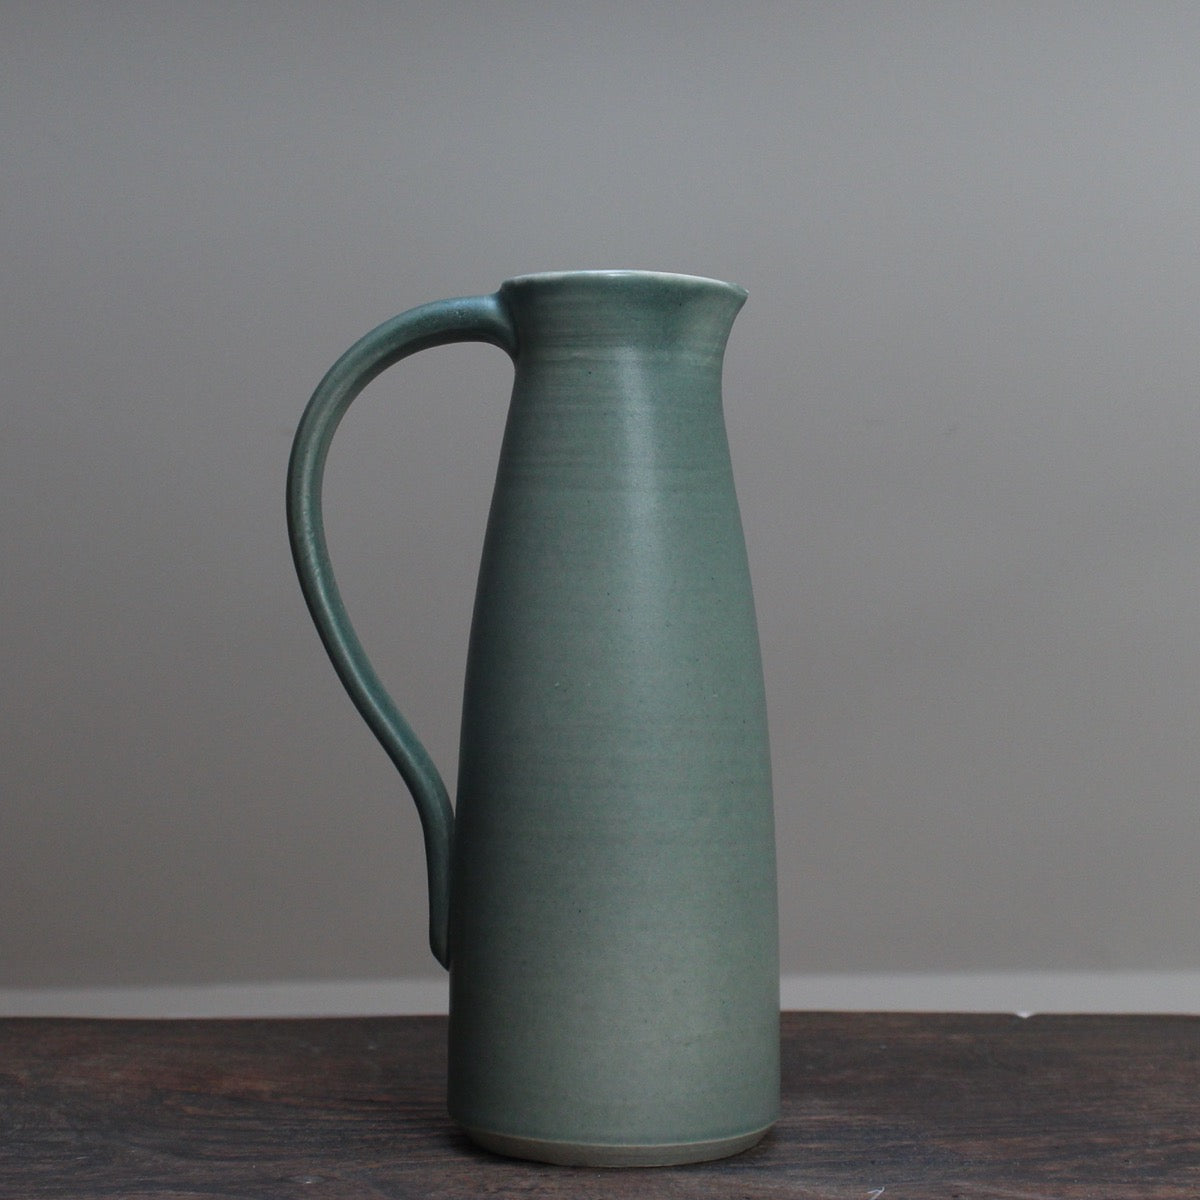 Olive green ceramic jug with handle by Lucy Burley on wooden table at the Byre Gallery 